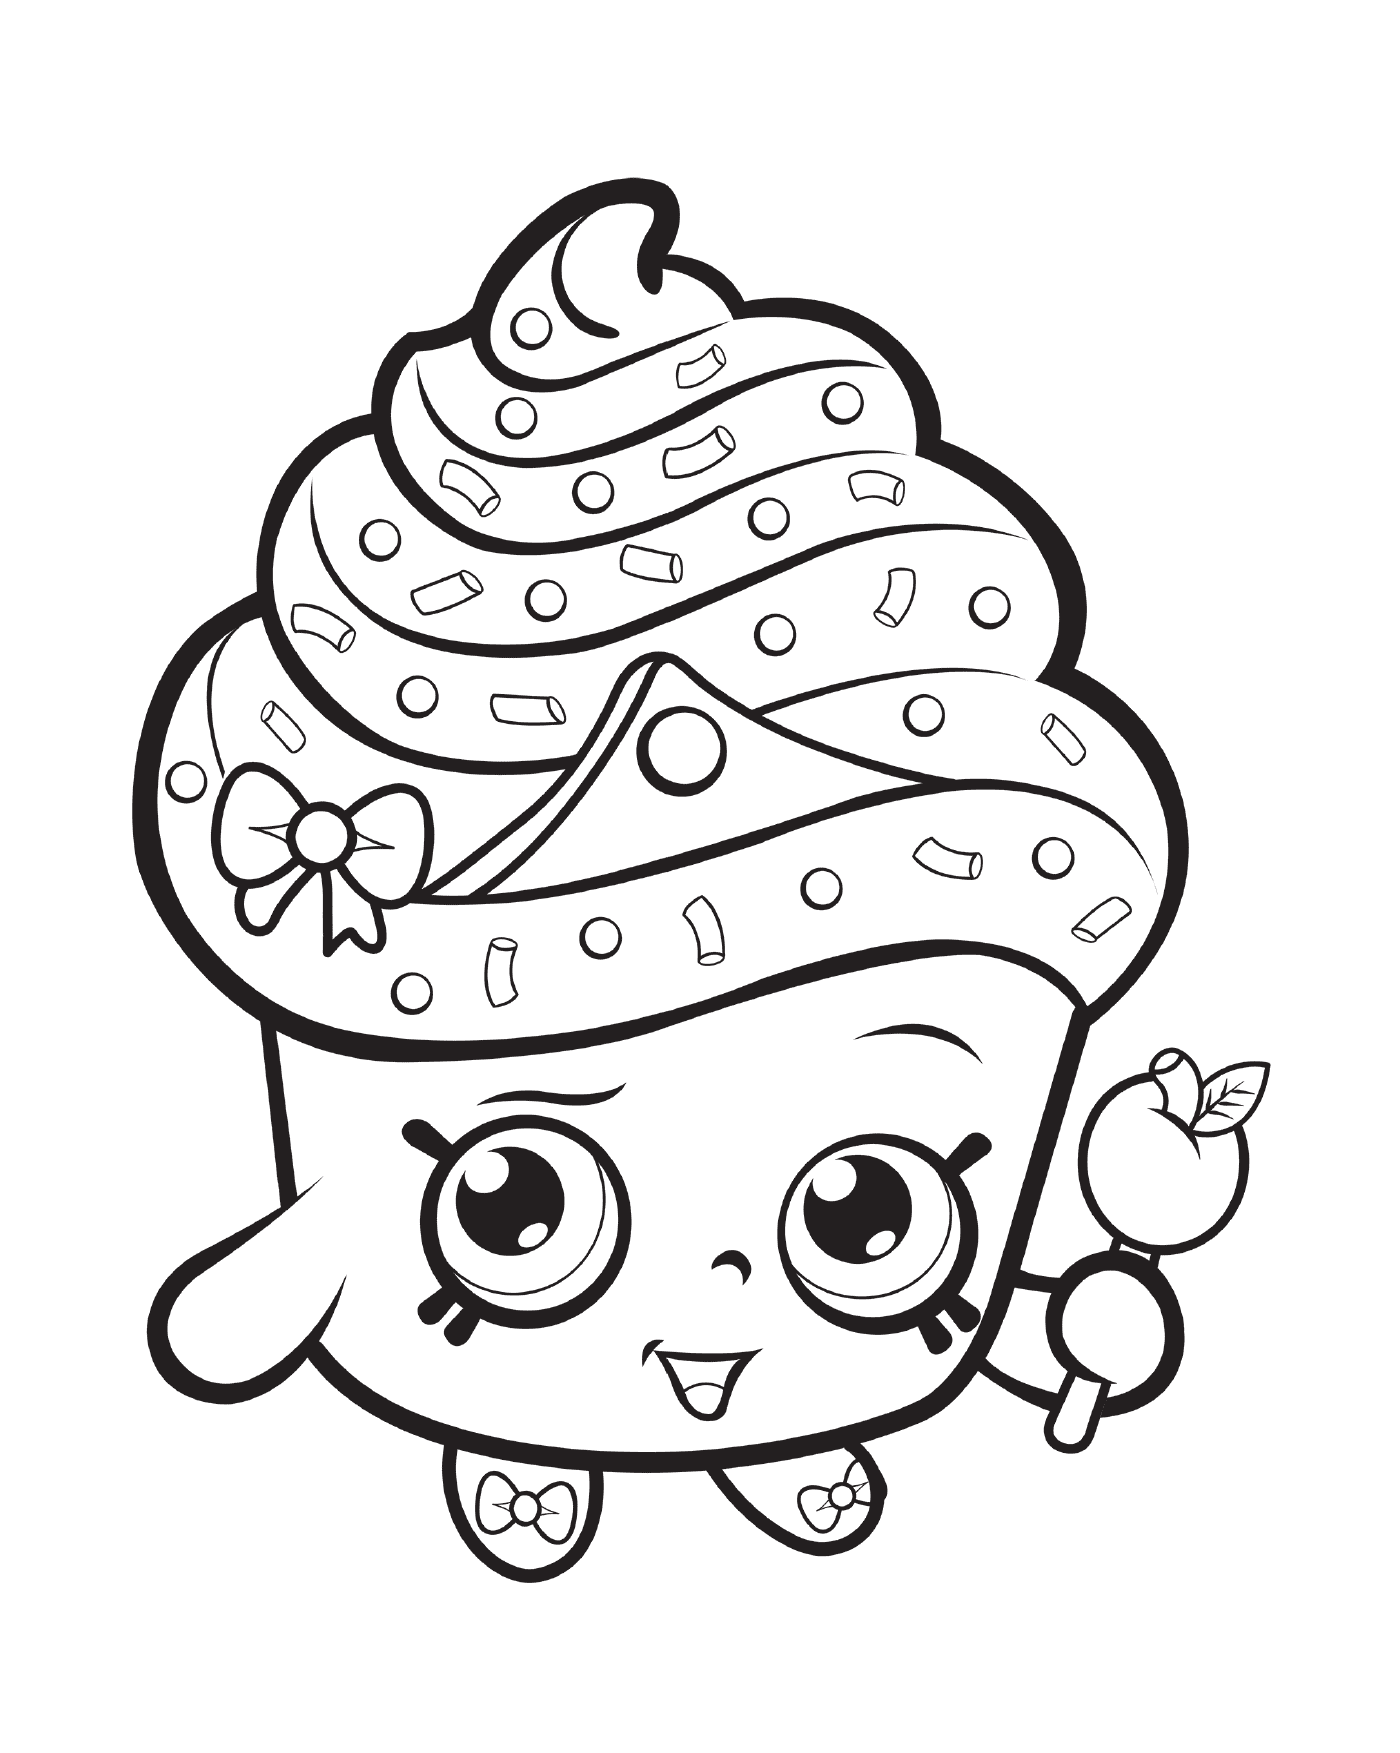  Cupcake Queen from Shopkins 